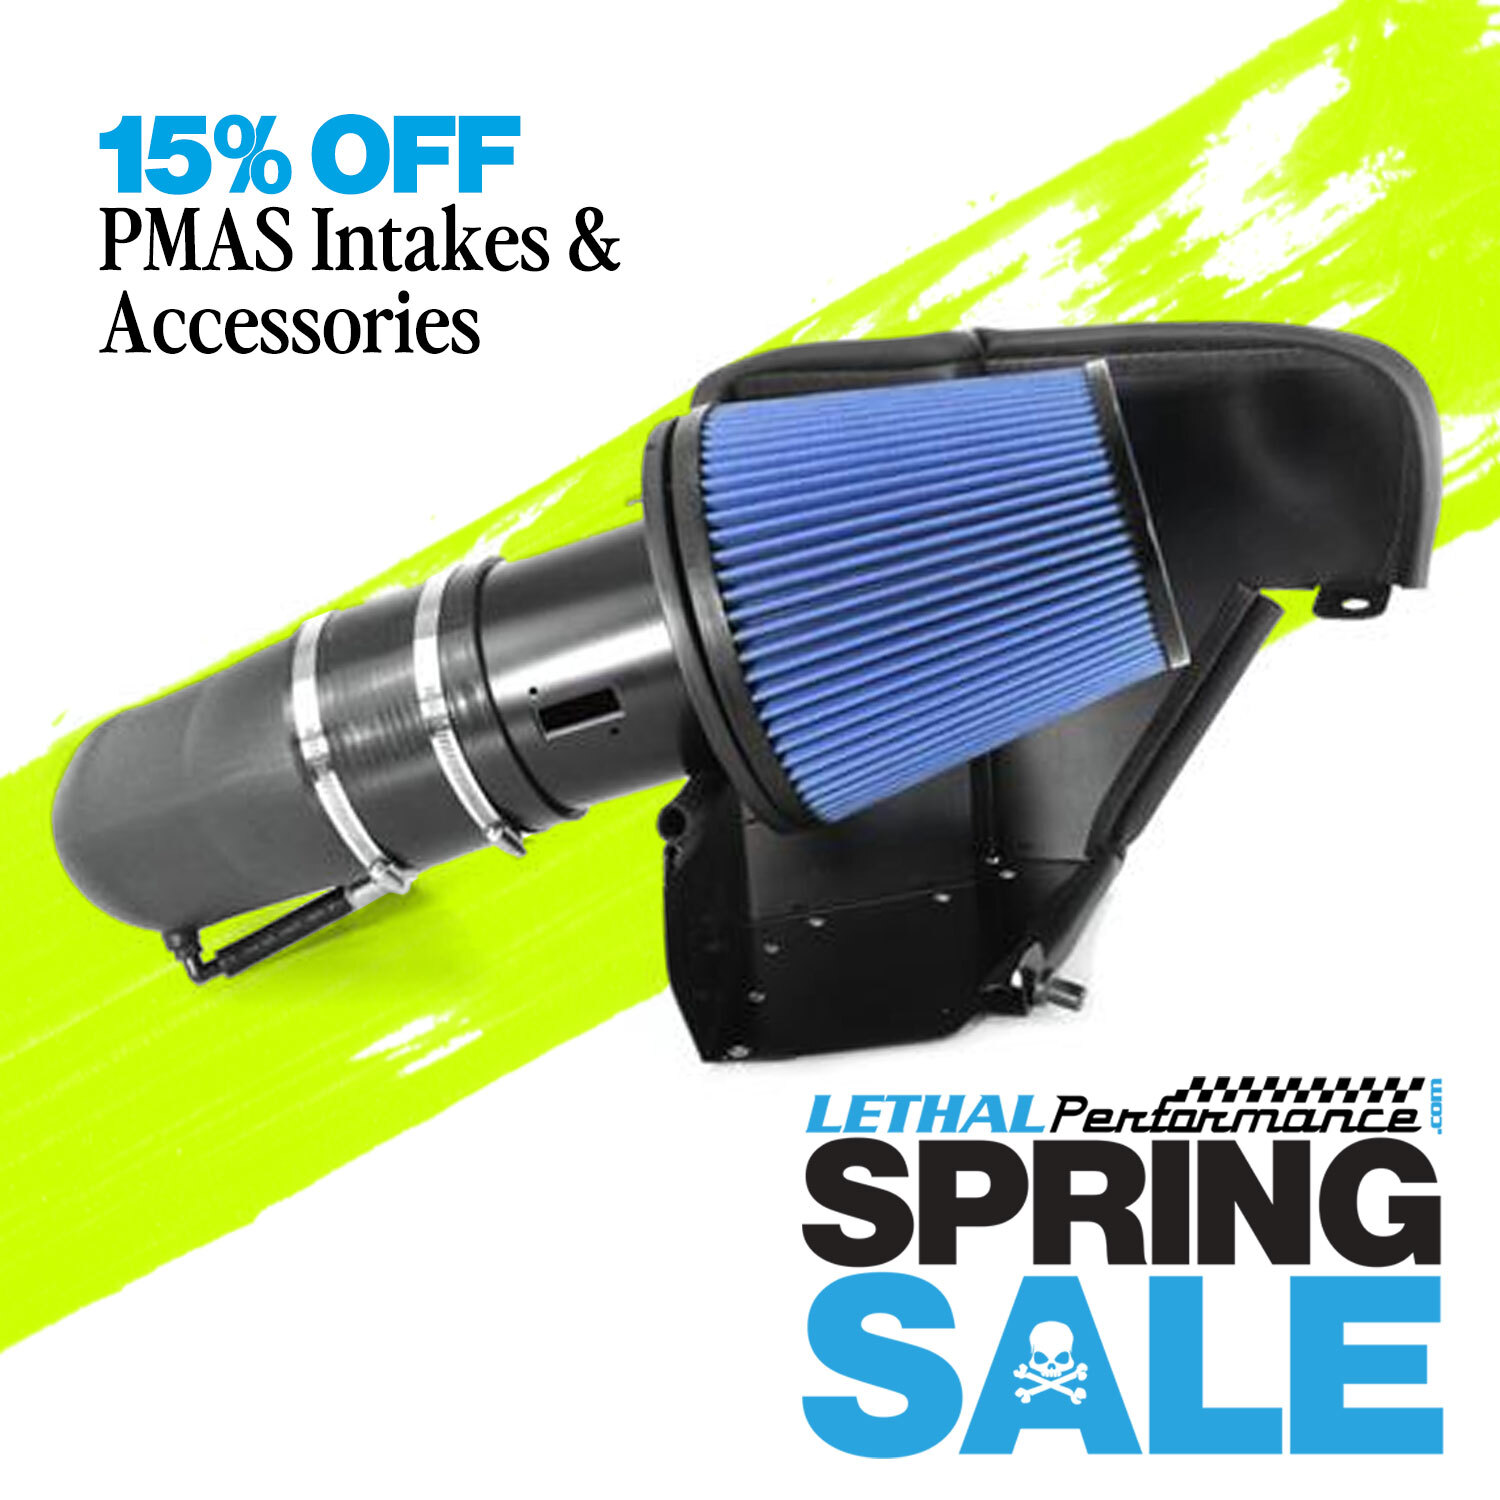 S650 Mustang Spring SALE has SPRUNG here at Lethal Performance!! springsale_pmas (2)